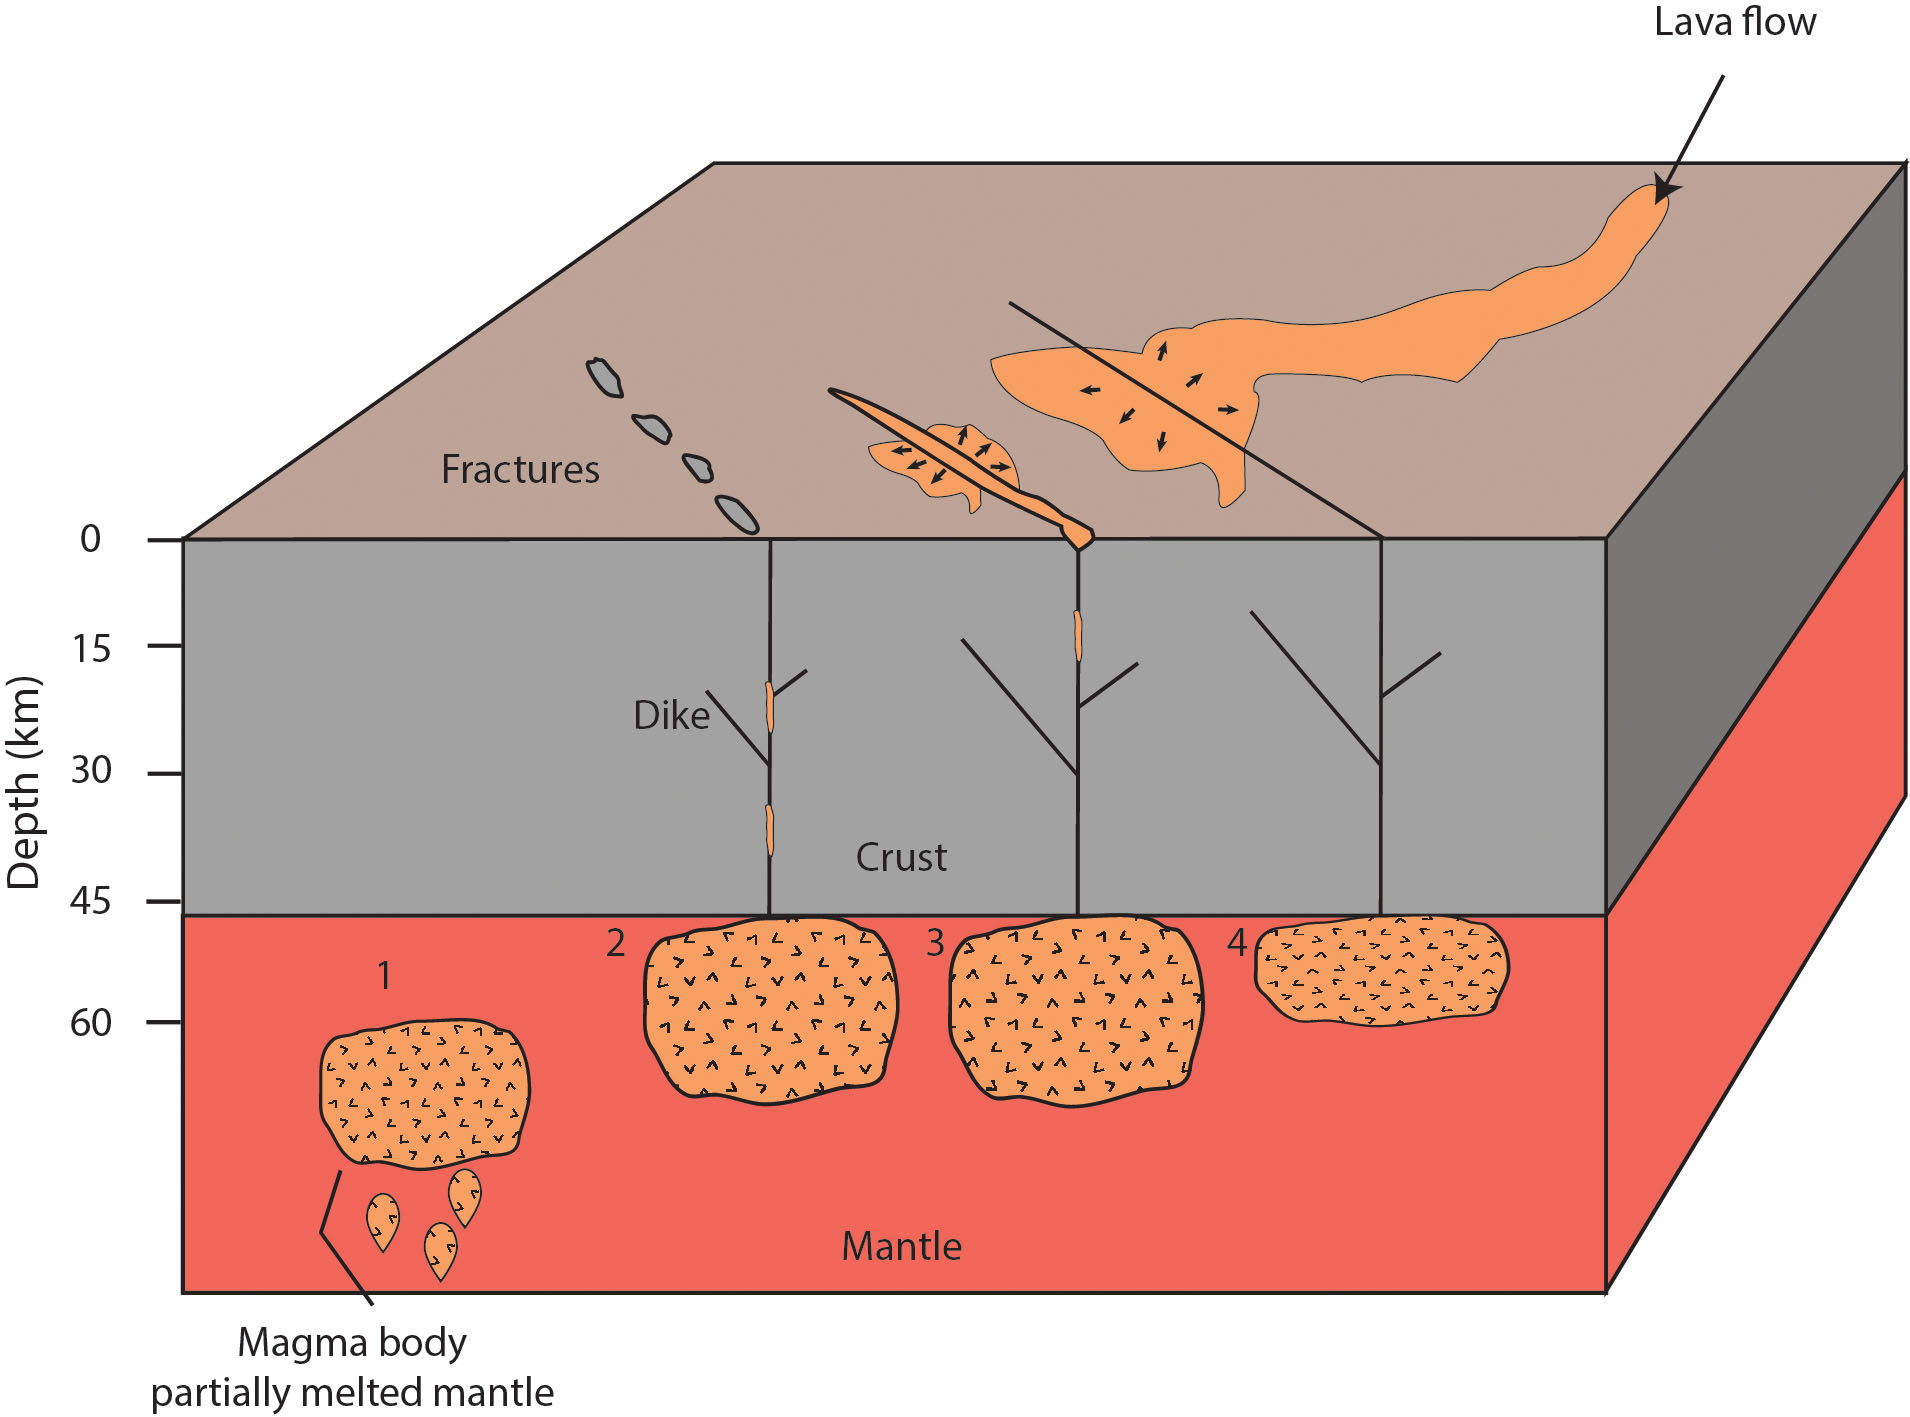 Magma formation